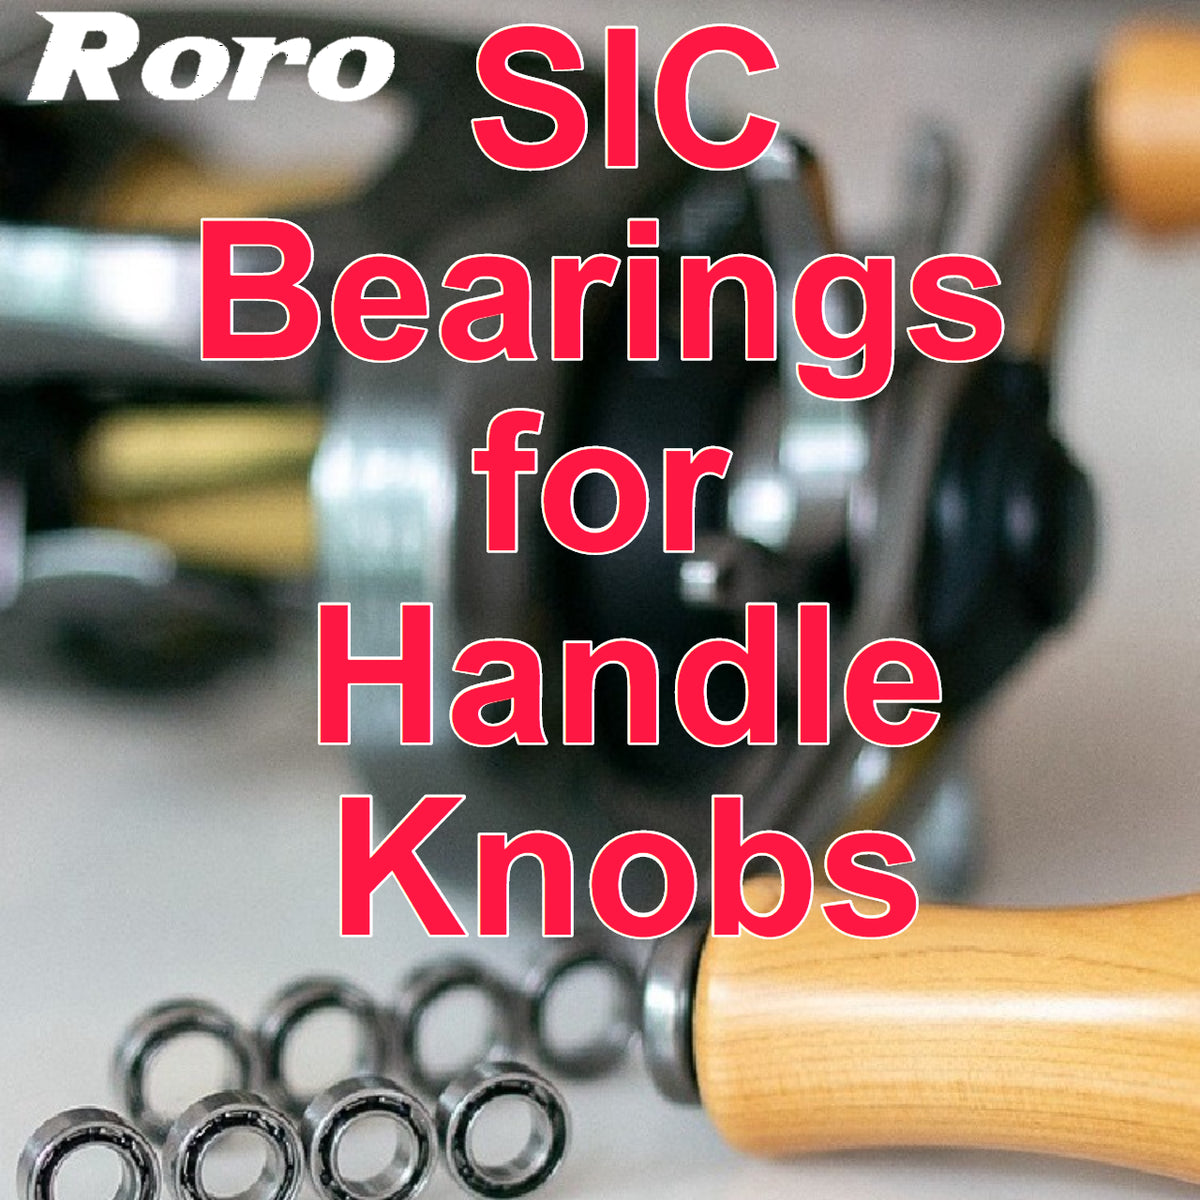 Roro SIC Bearings for Handle Knobs: Enhance Your BFS Reel Performance –  RORO LURE